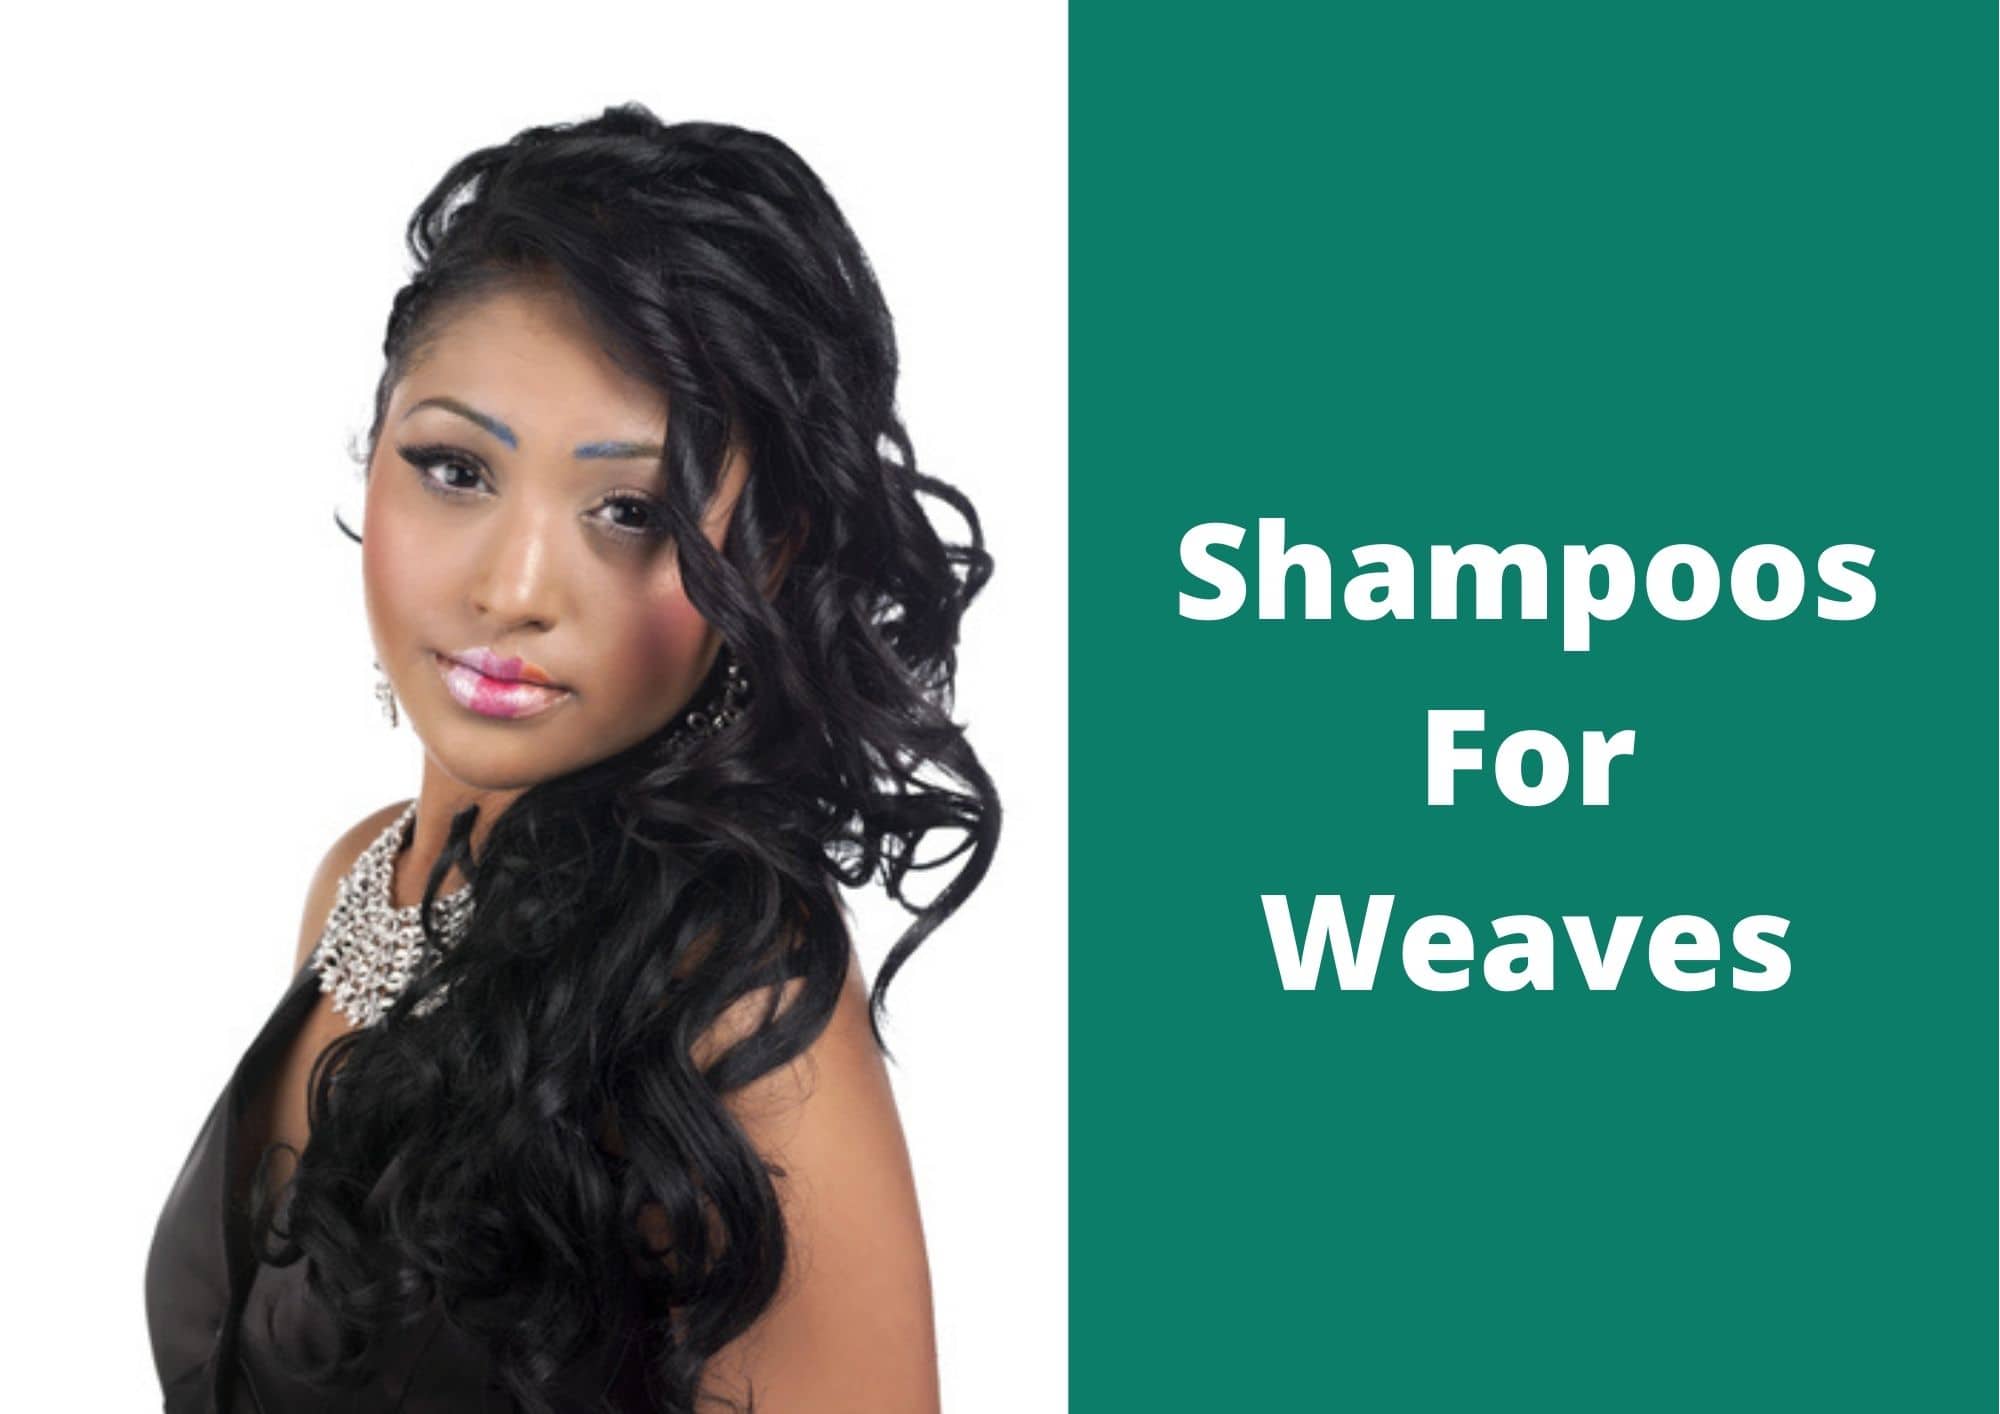 5 Best Shampoo For Weaves 2023 - Hair Everyday Review